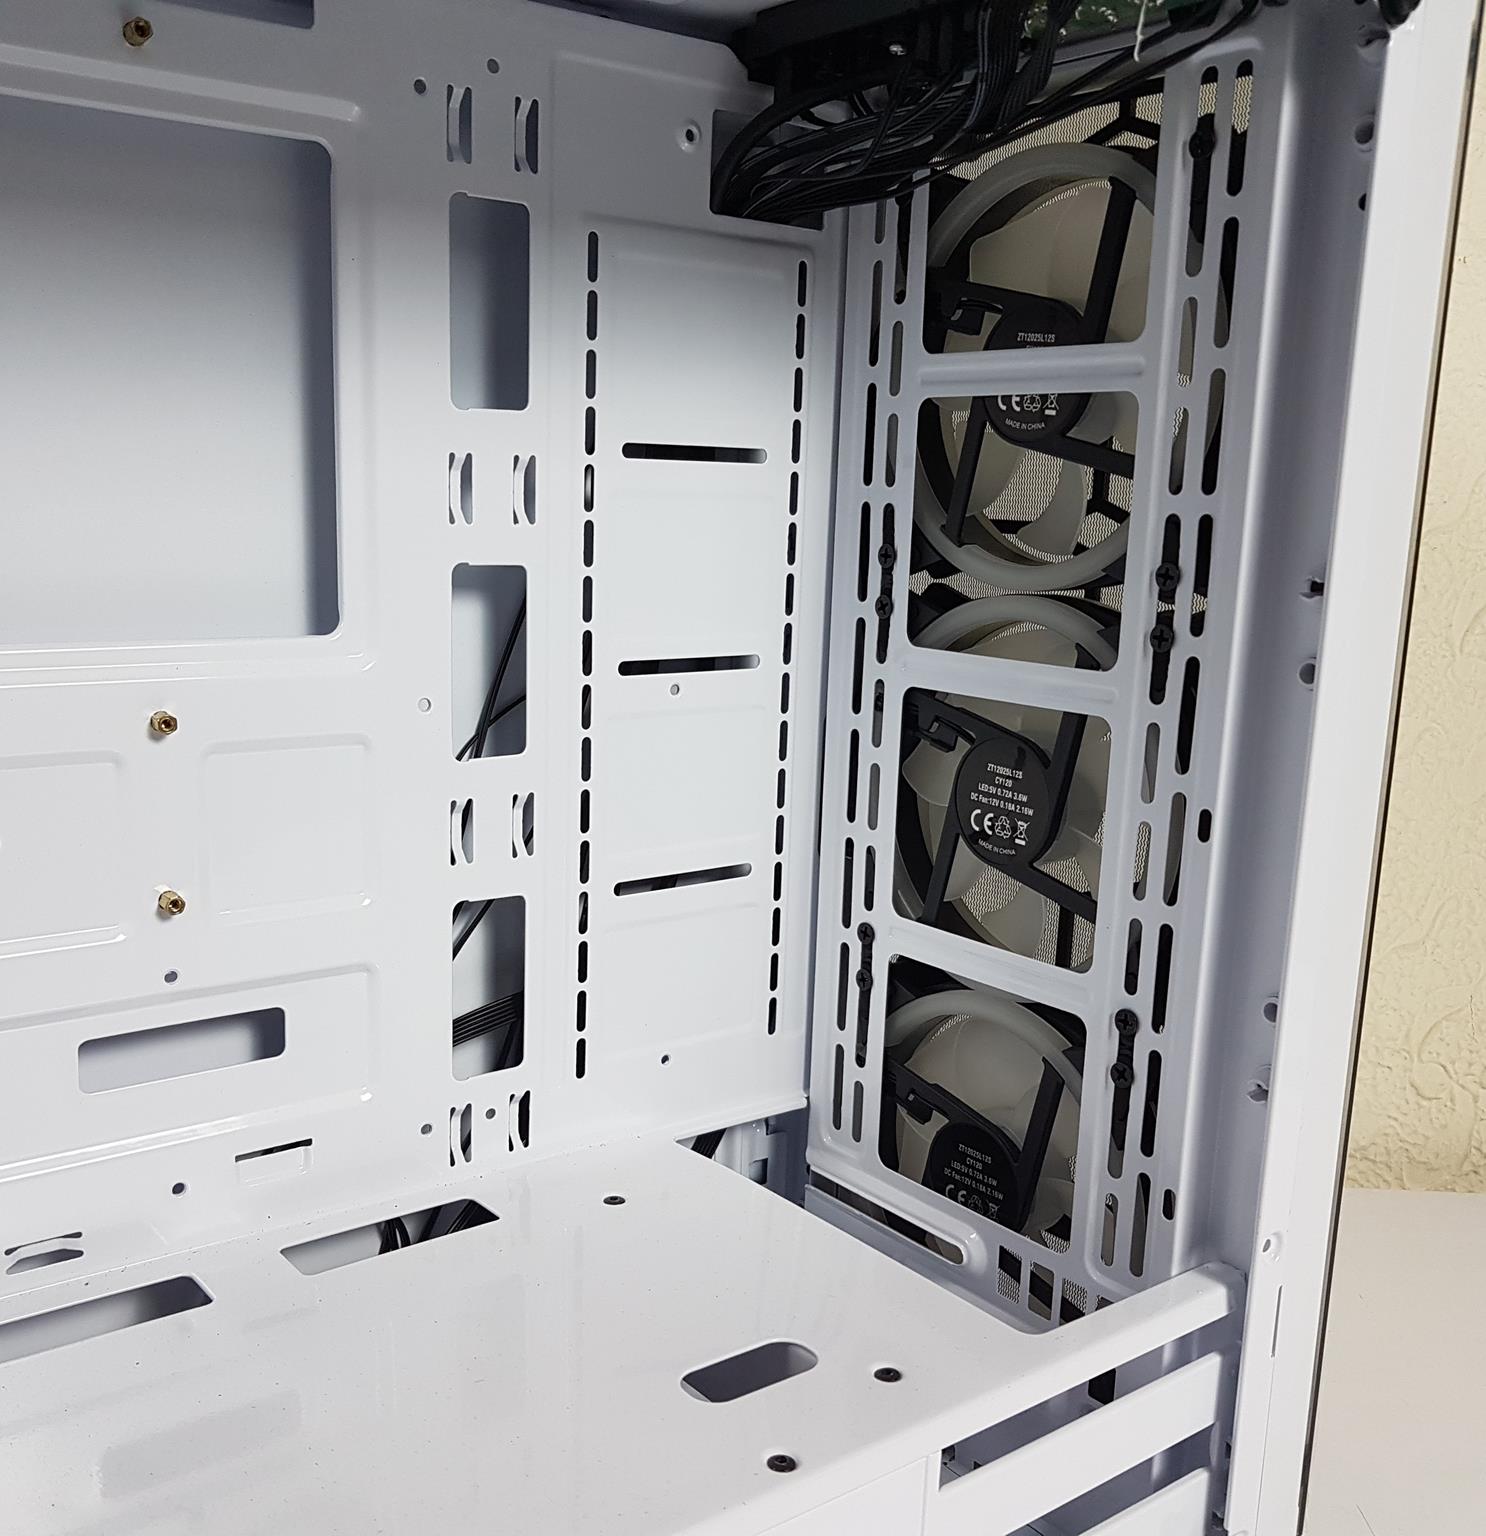 venom x controller chassis frame